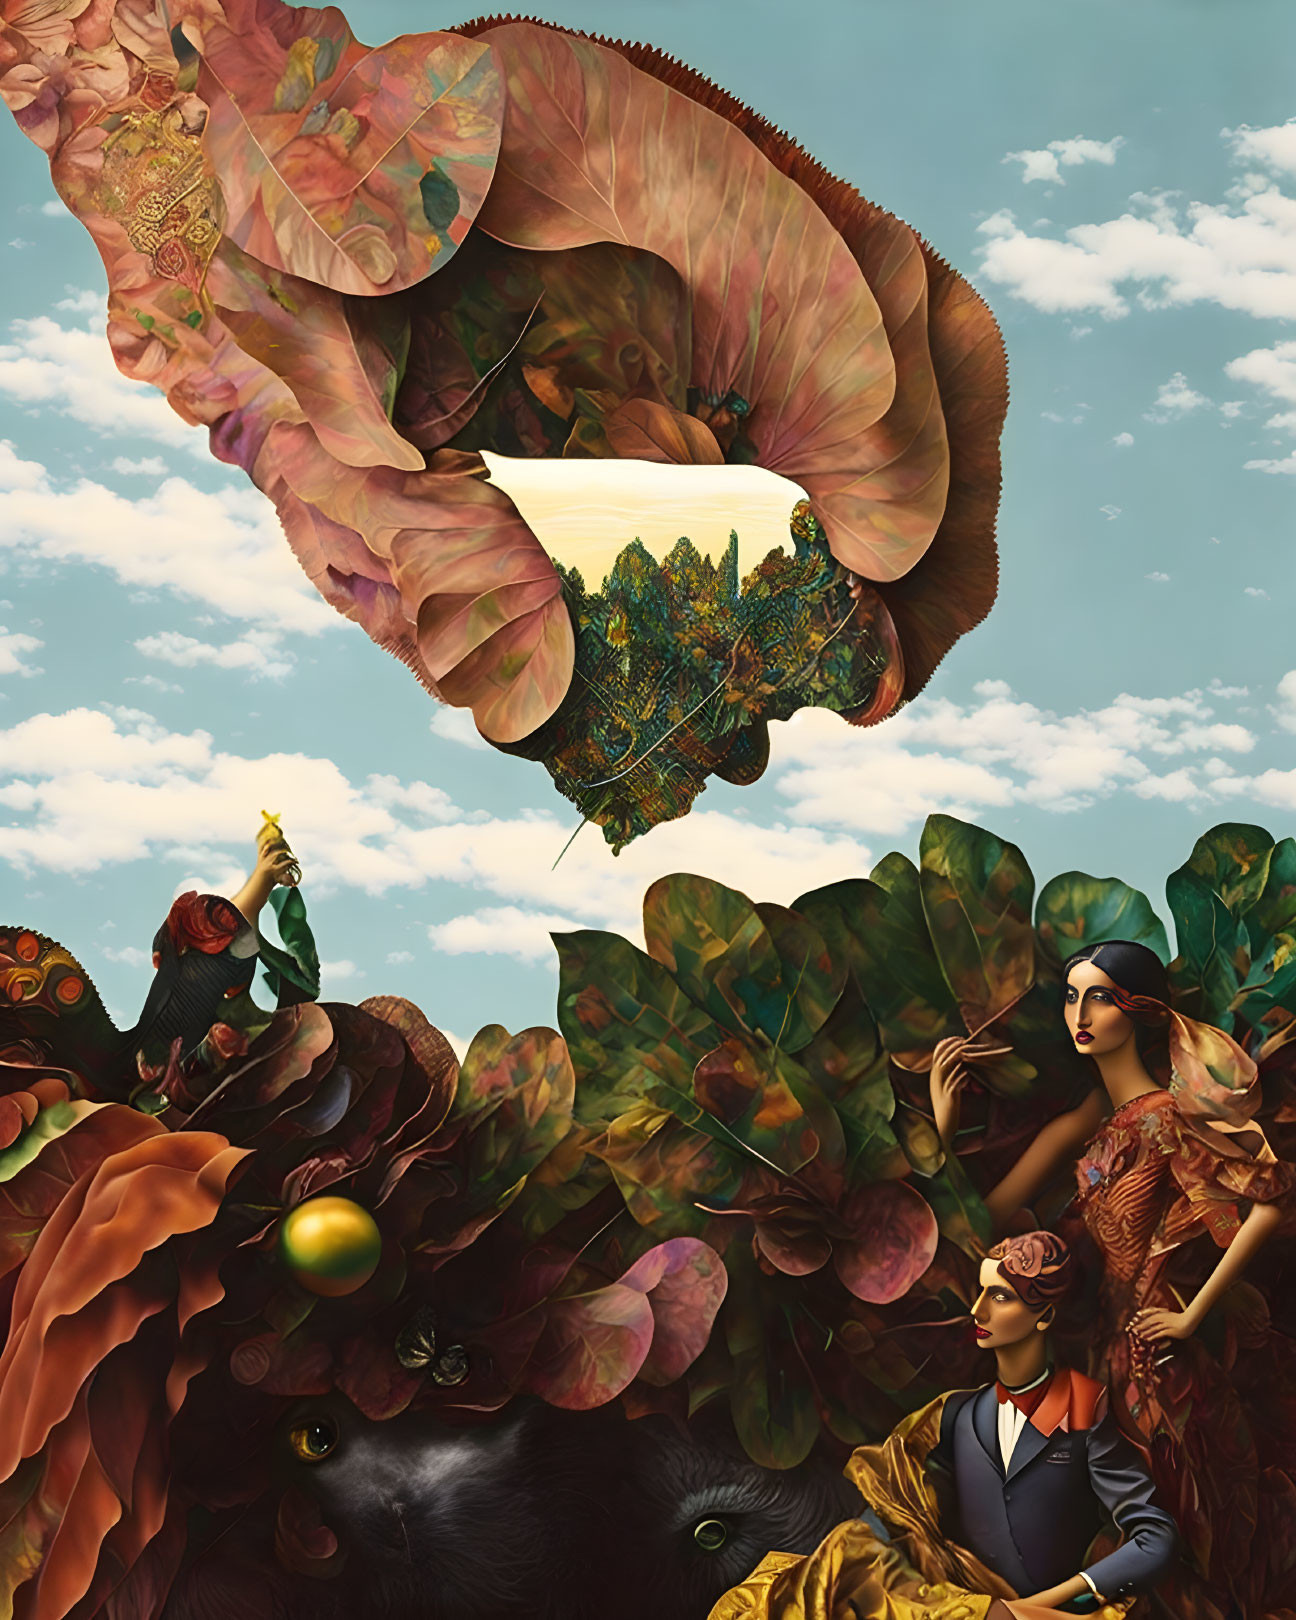 Surrealistic artwork featuring women, foliage, shell structure, and hidden animal under cloudy sky